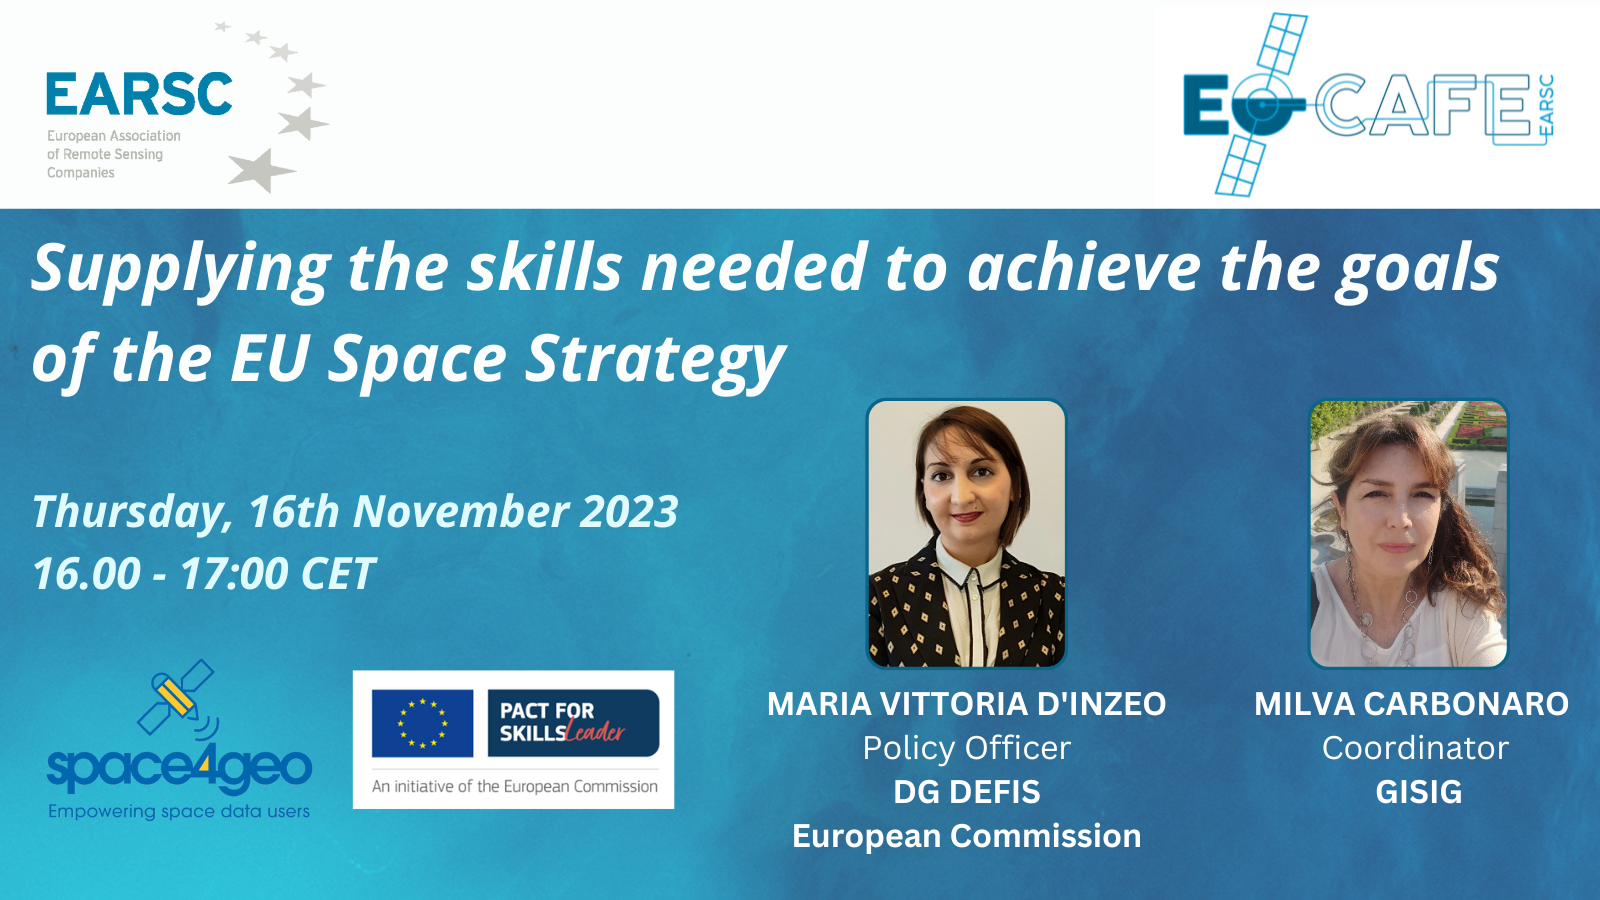 EOcafe: Supplying the skills needed to achieve the goals of the EU Space Strategy